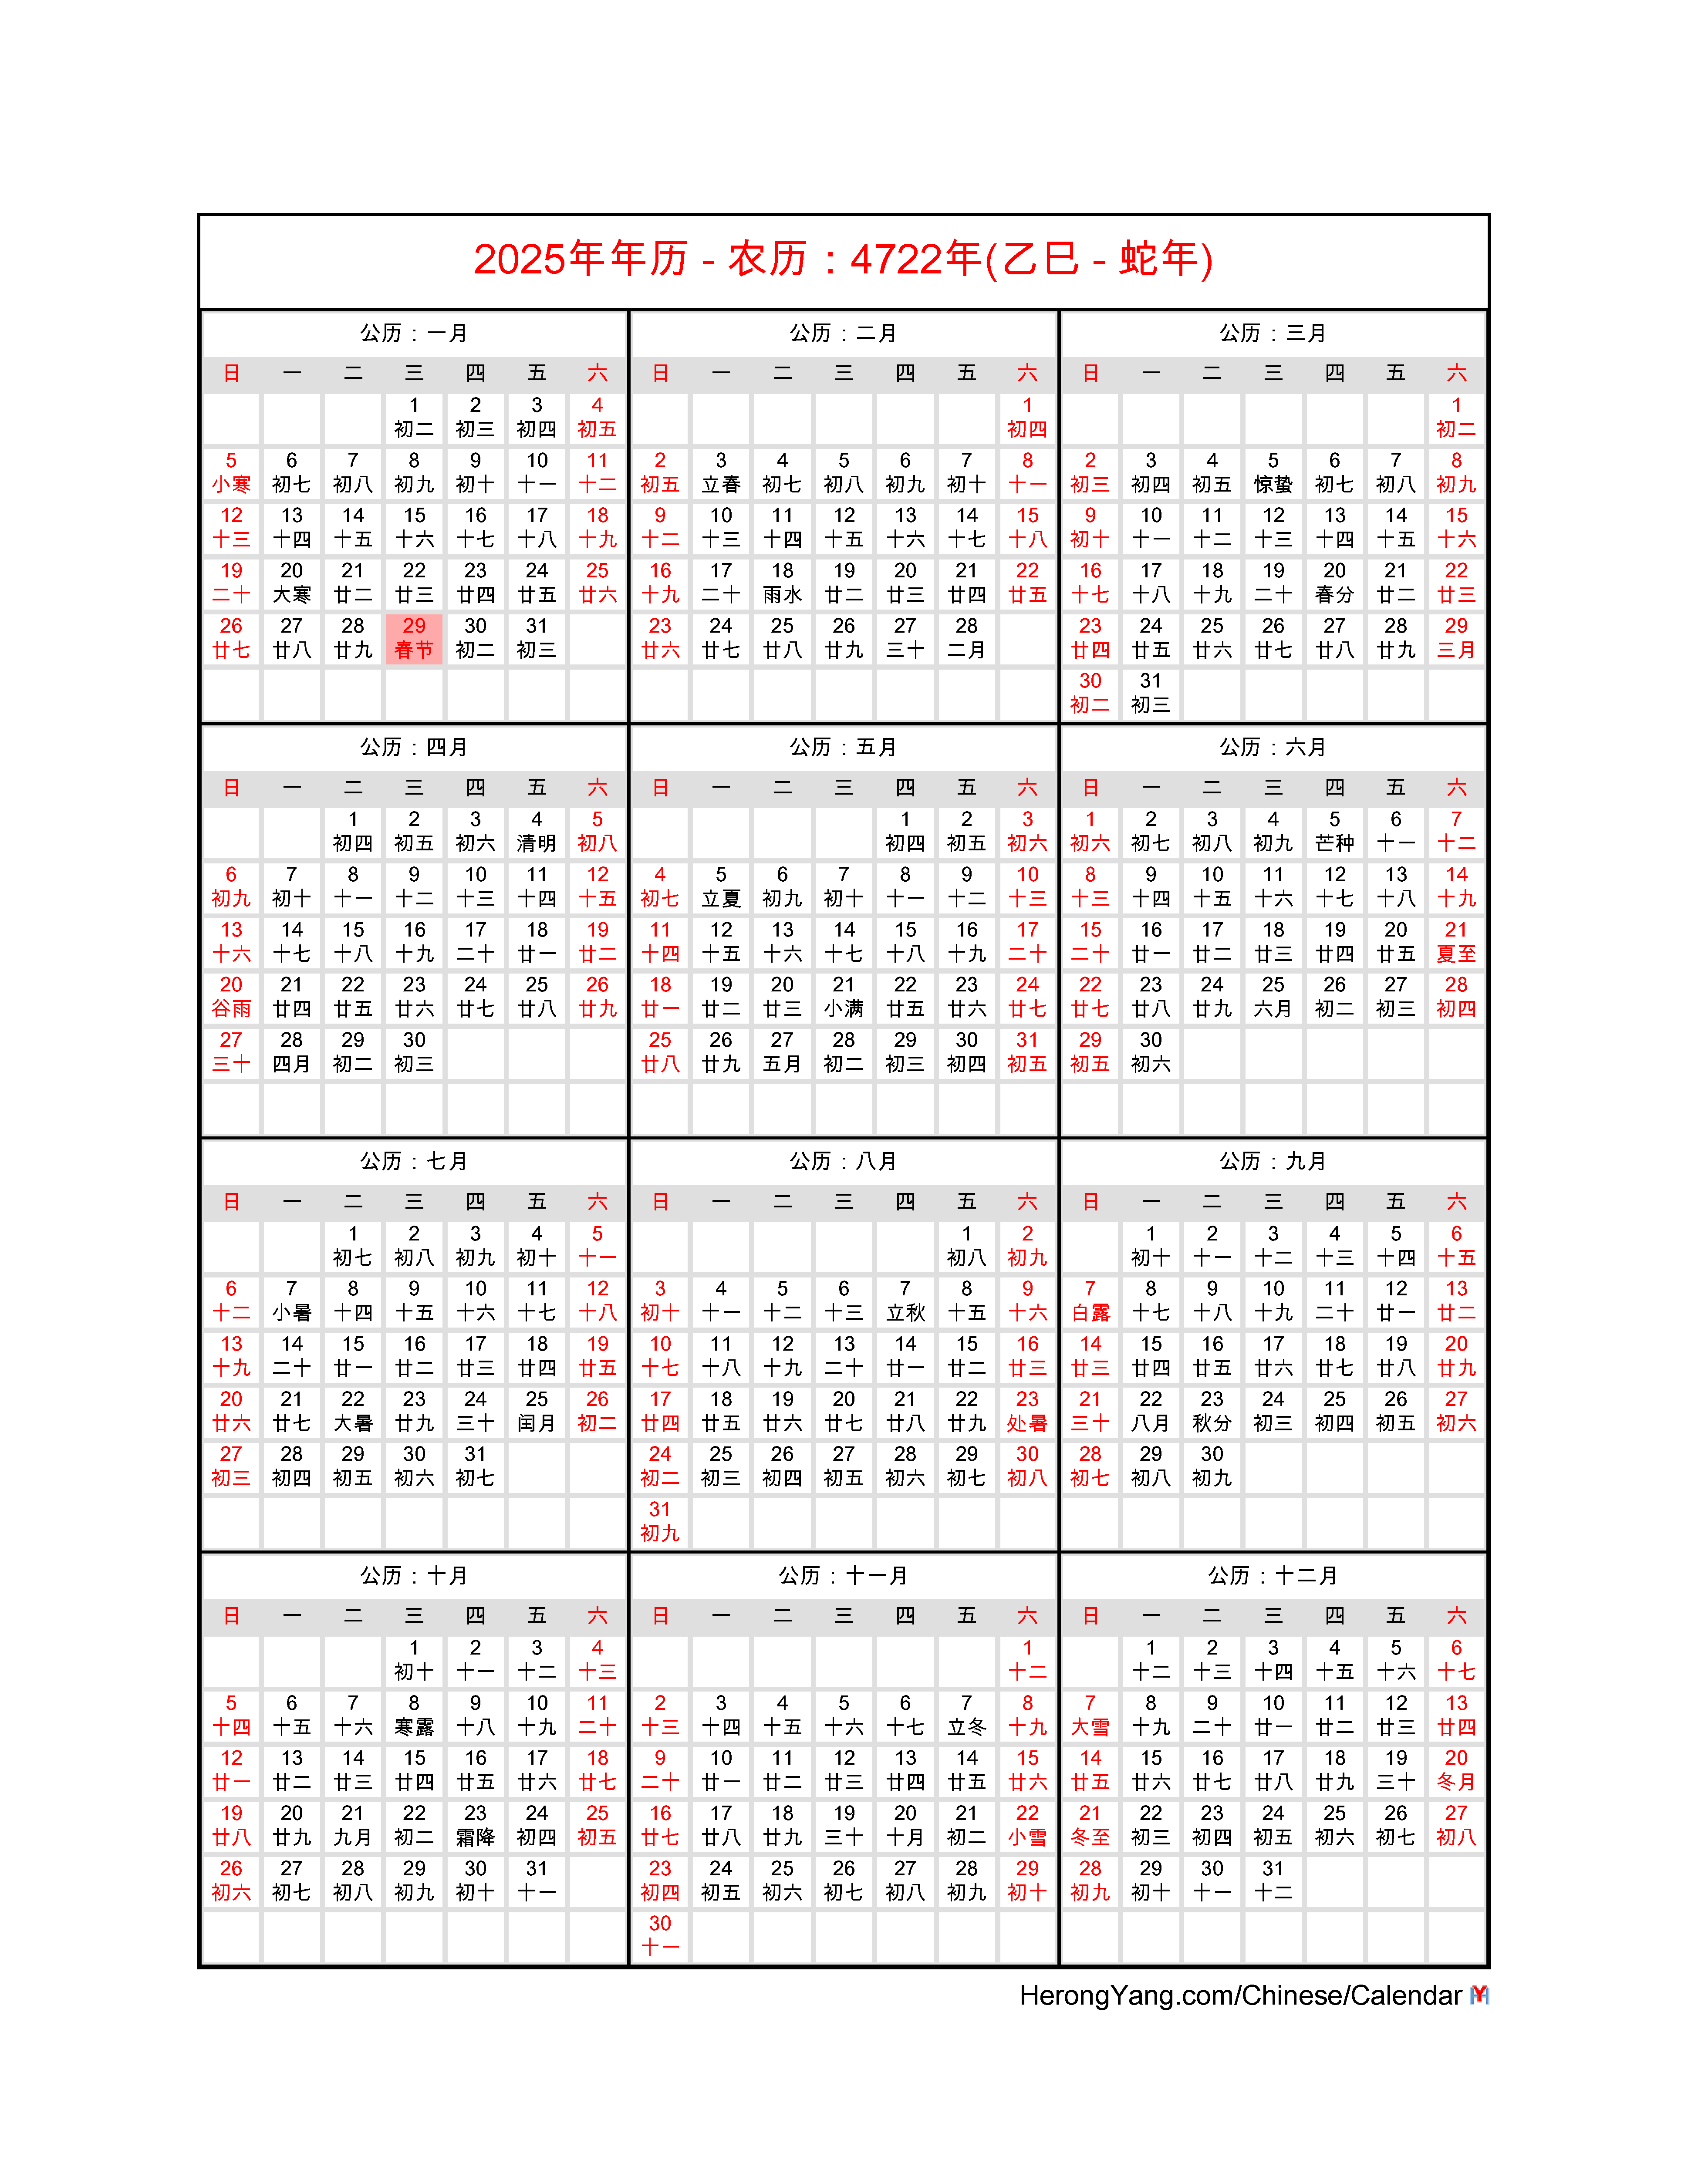 Chinese Calendar For 2025 